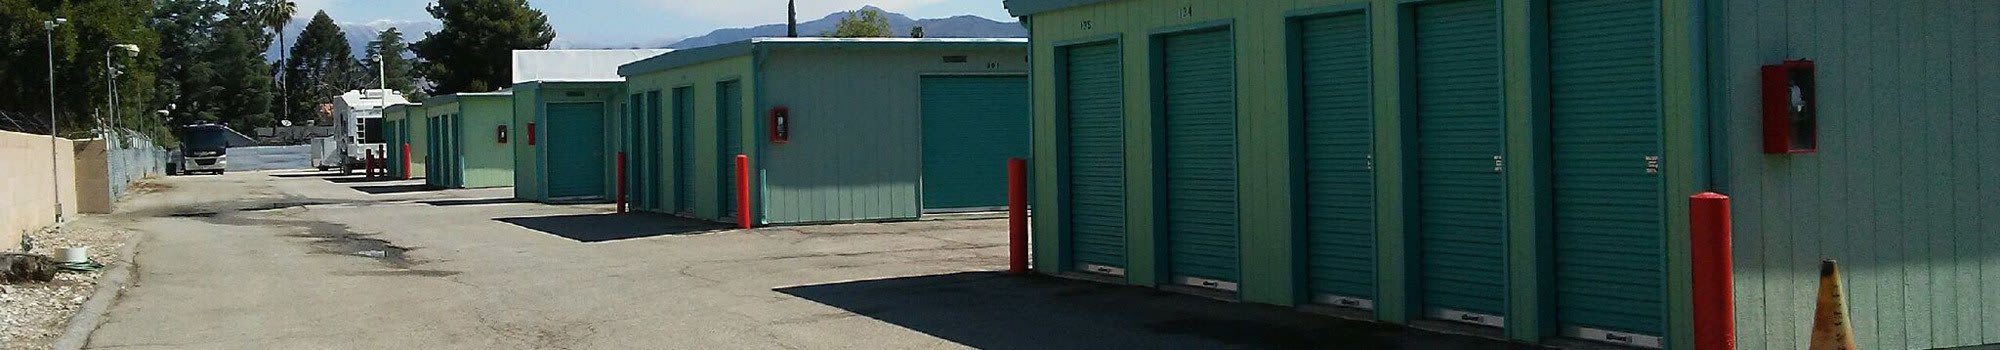 View our privacy policy at Handi Storage in Calimesa, California